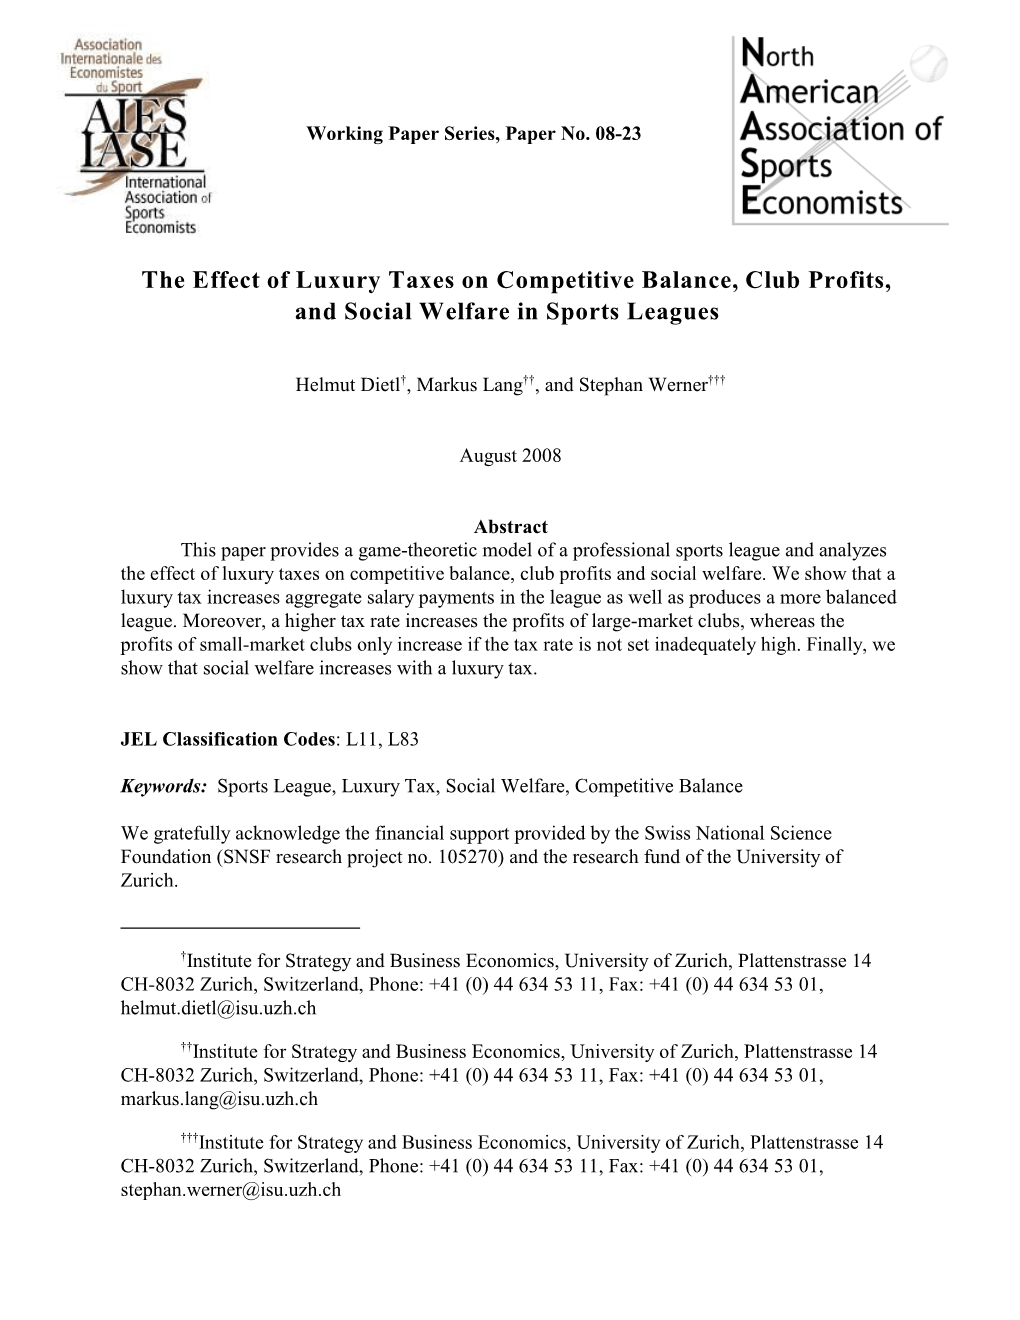 The Effect of Luxury Taxes on Competitive Balance, Club Profits, and Social Welfare in Sports Leagues